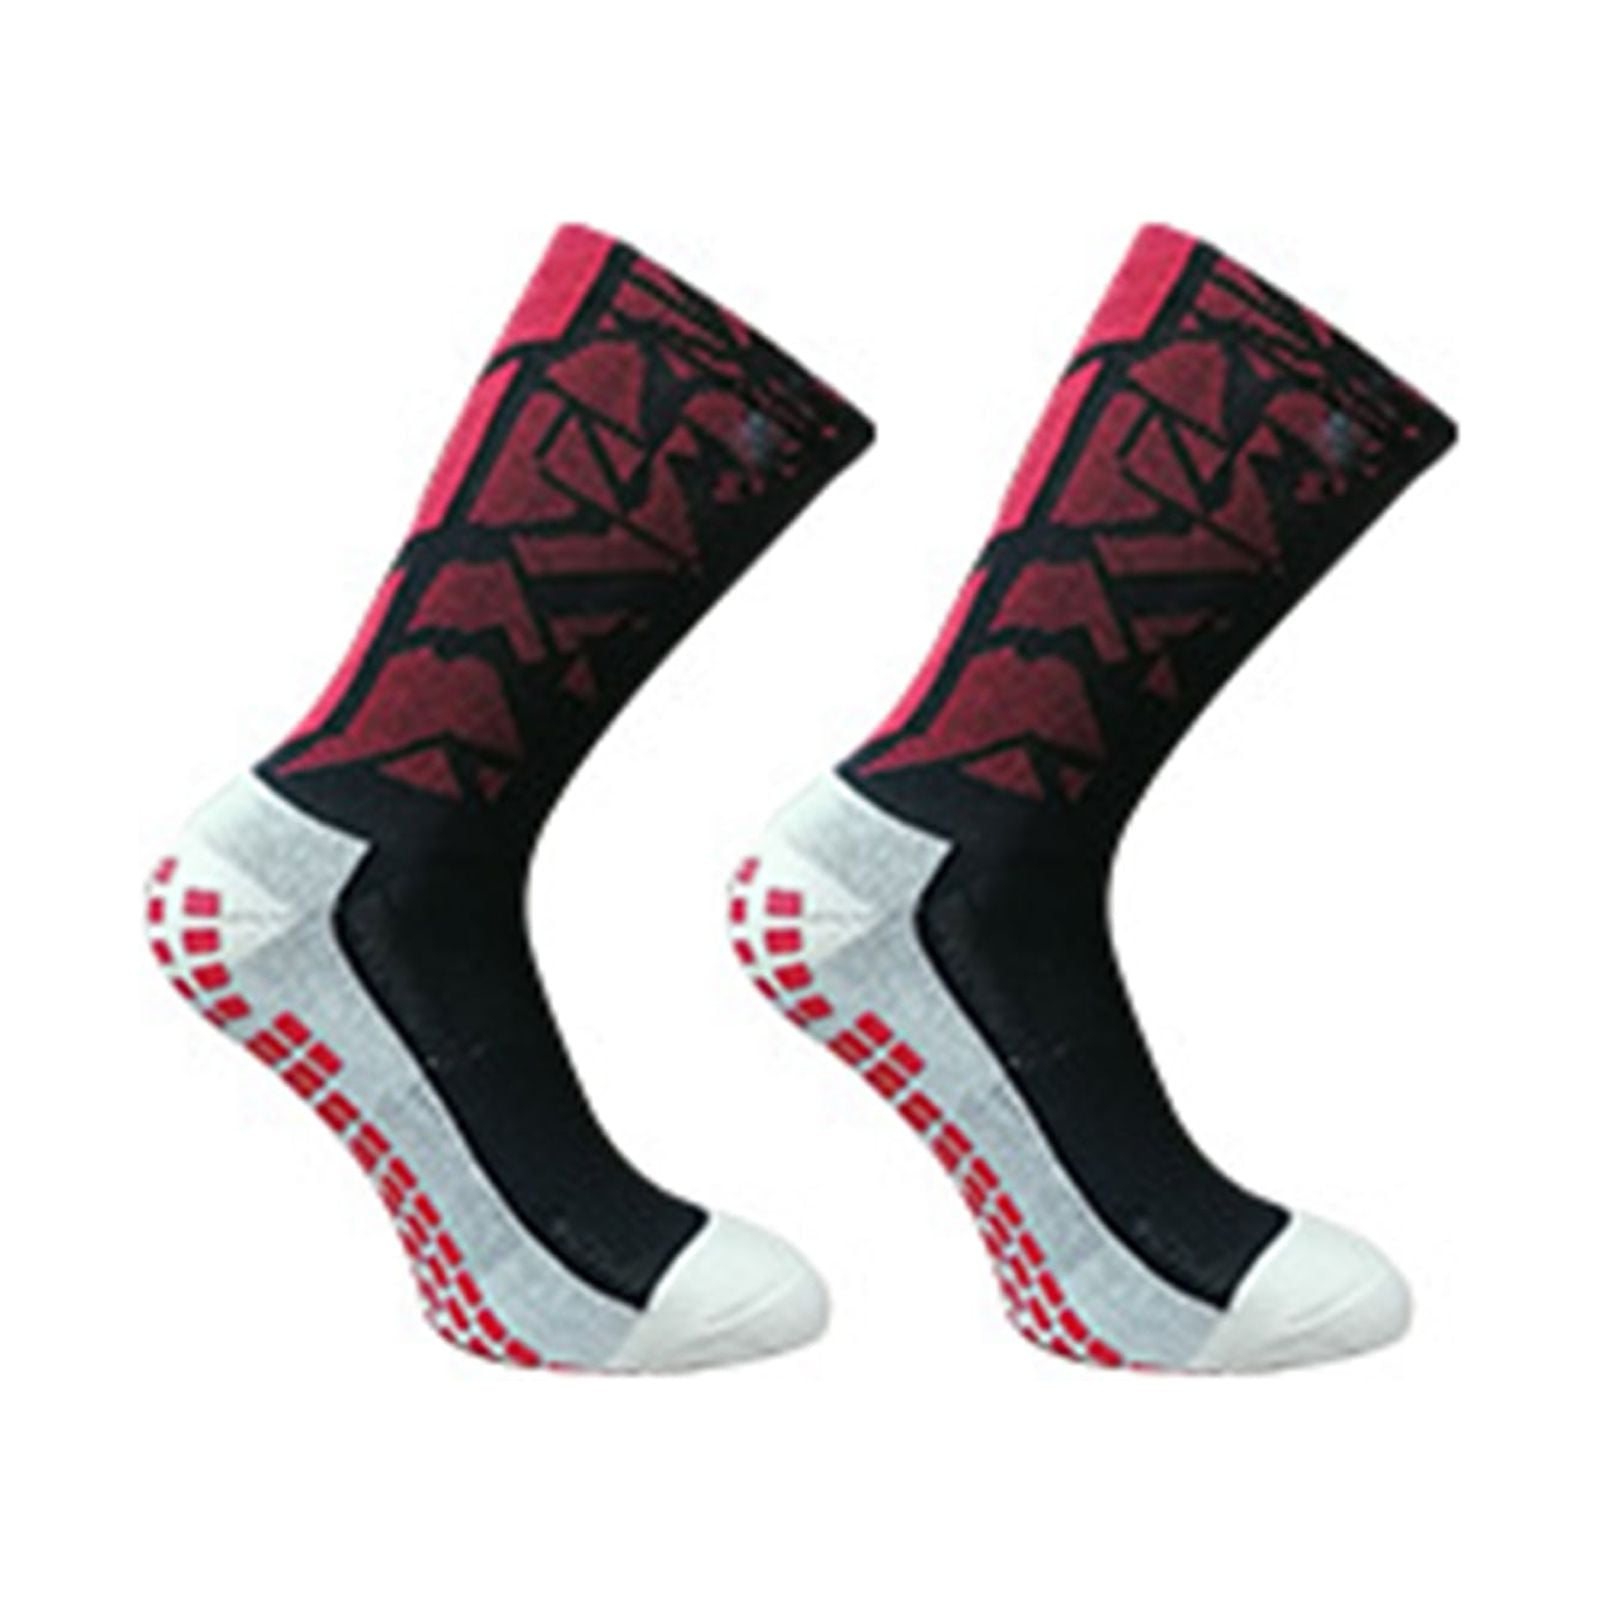 HUANLANG Anti Slip Soccer Socks Mens Athletic Grip Socks Non-slip Sports  Sock Anti Blister Socks with Grips Unisex 2 Pairs